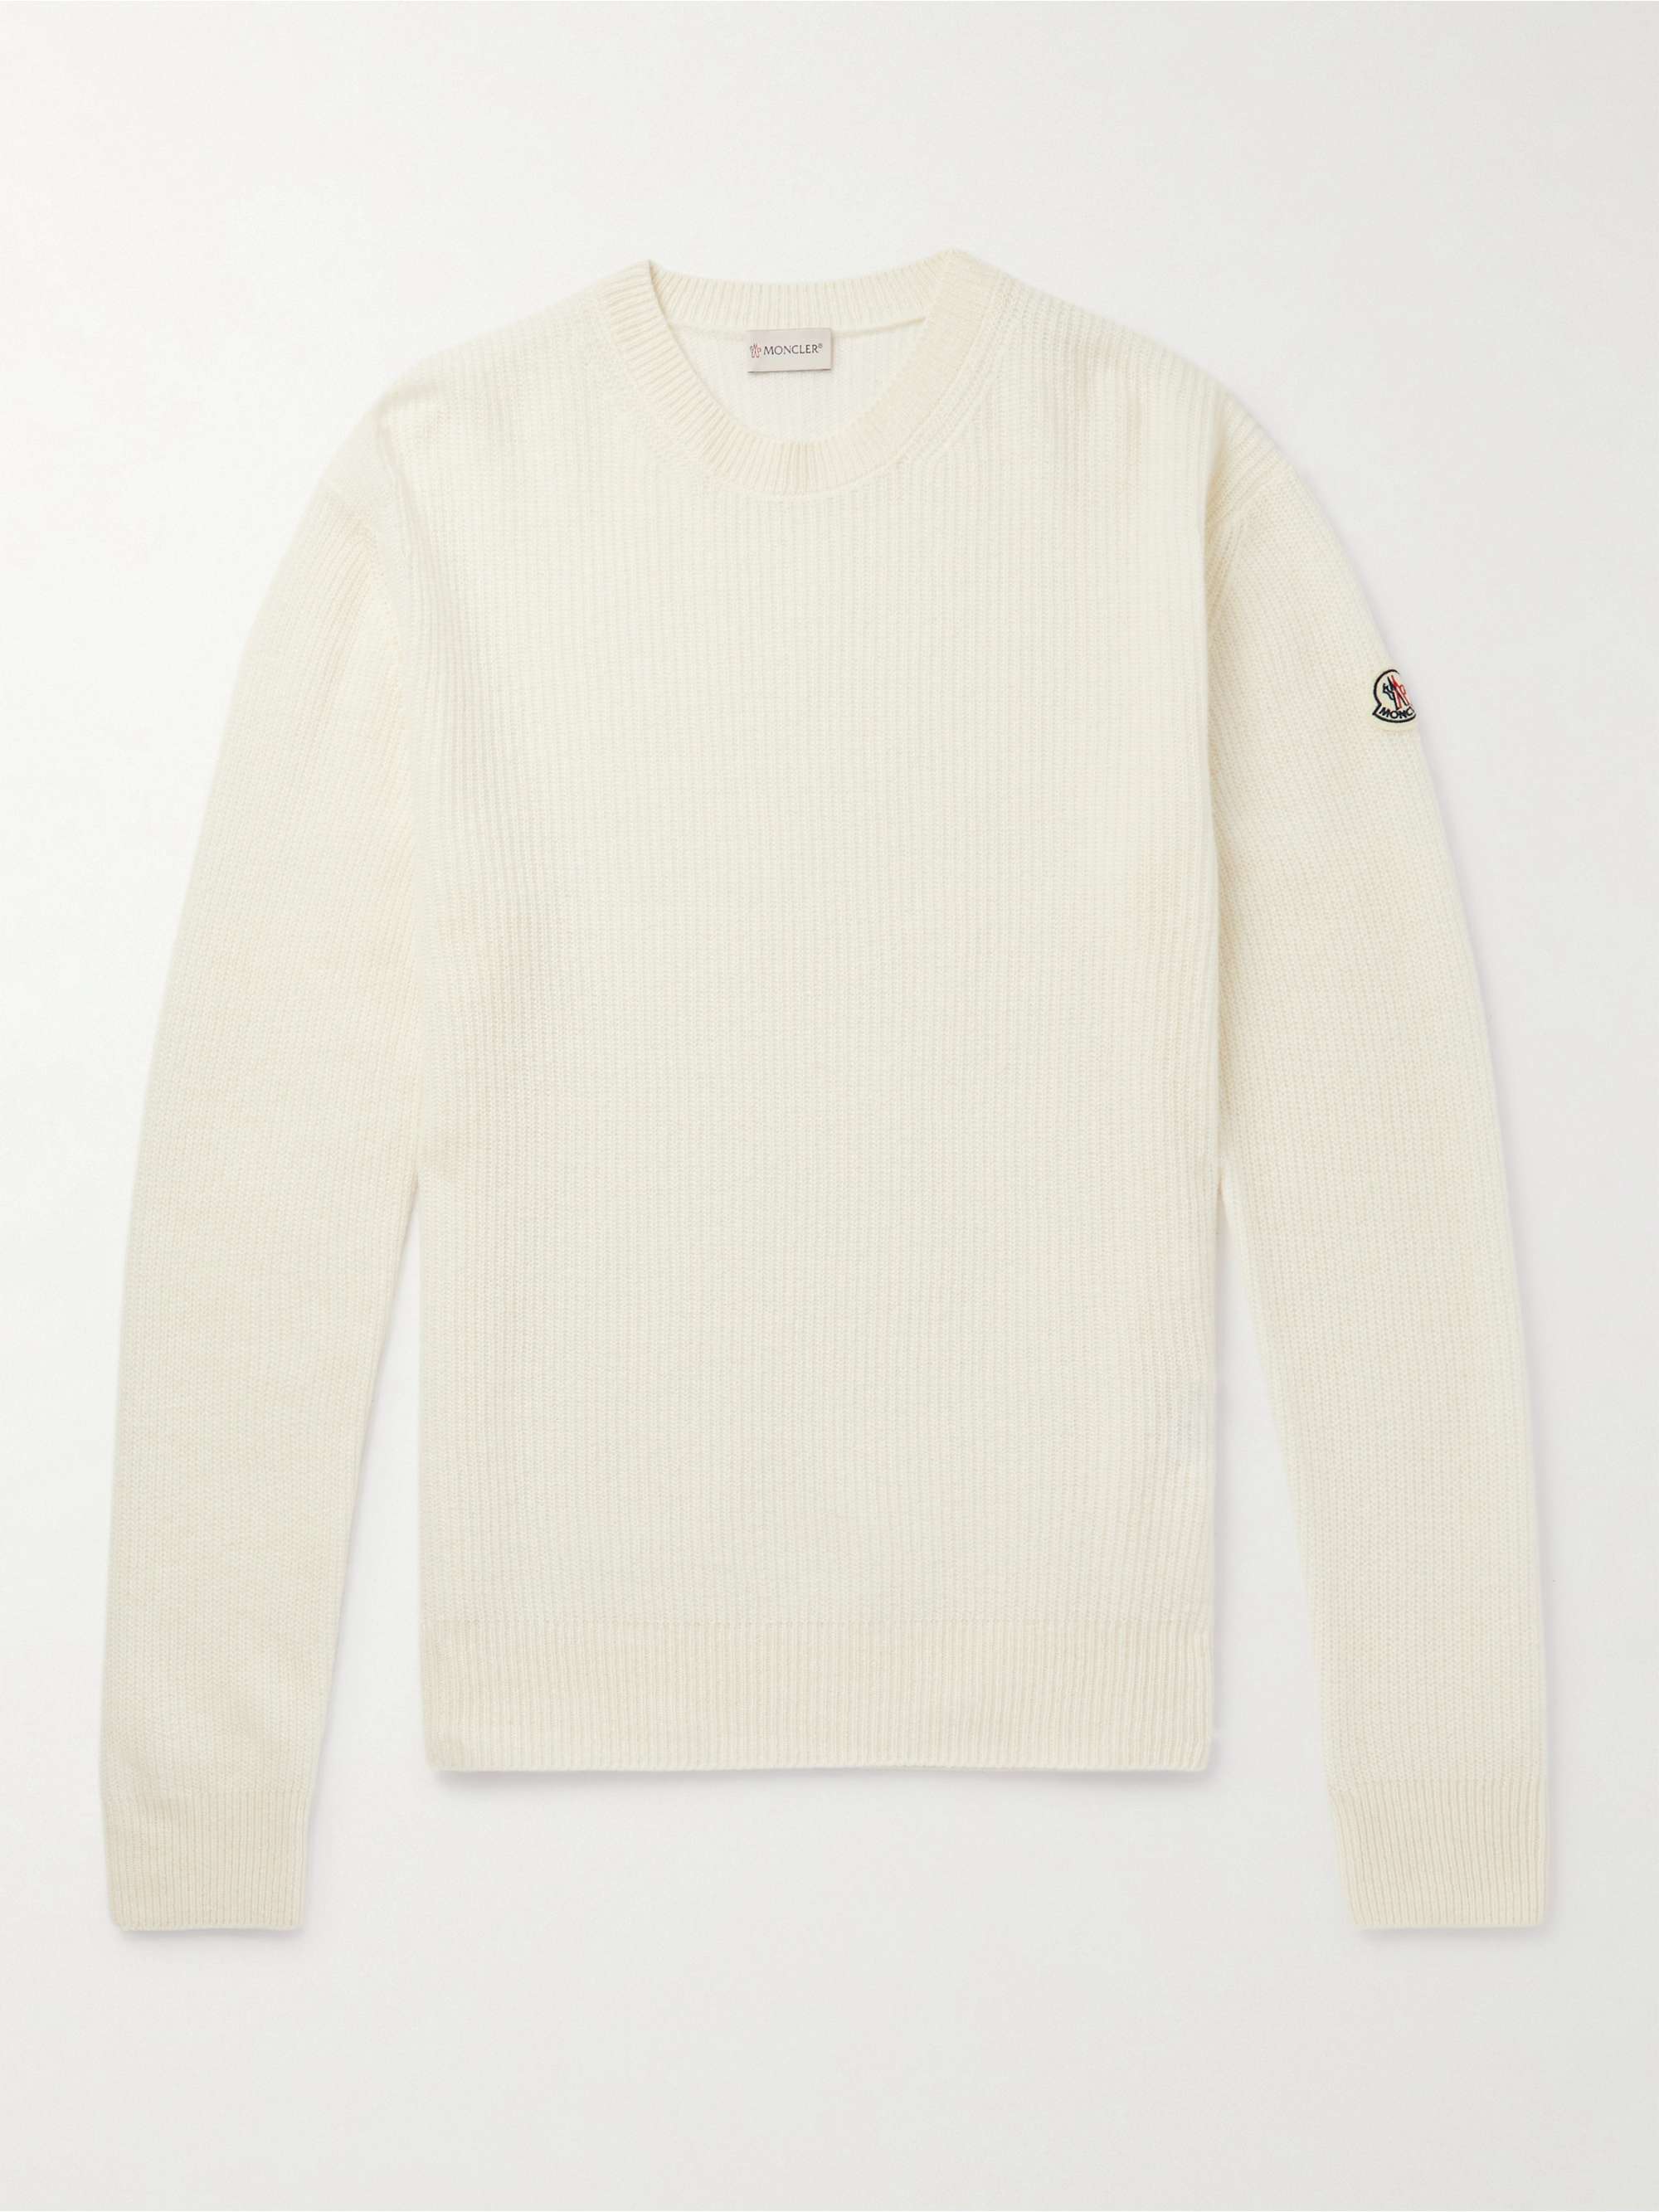 MONCLER Ribbed Virgin Wool and Cashmere-Blend Sweater | MR PORTER